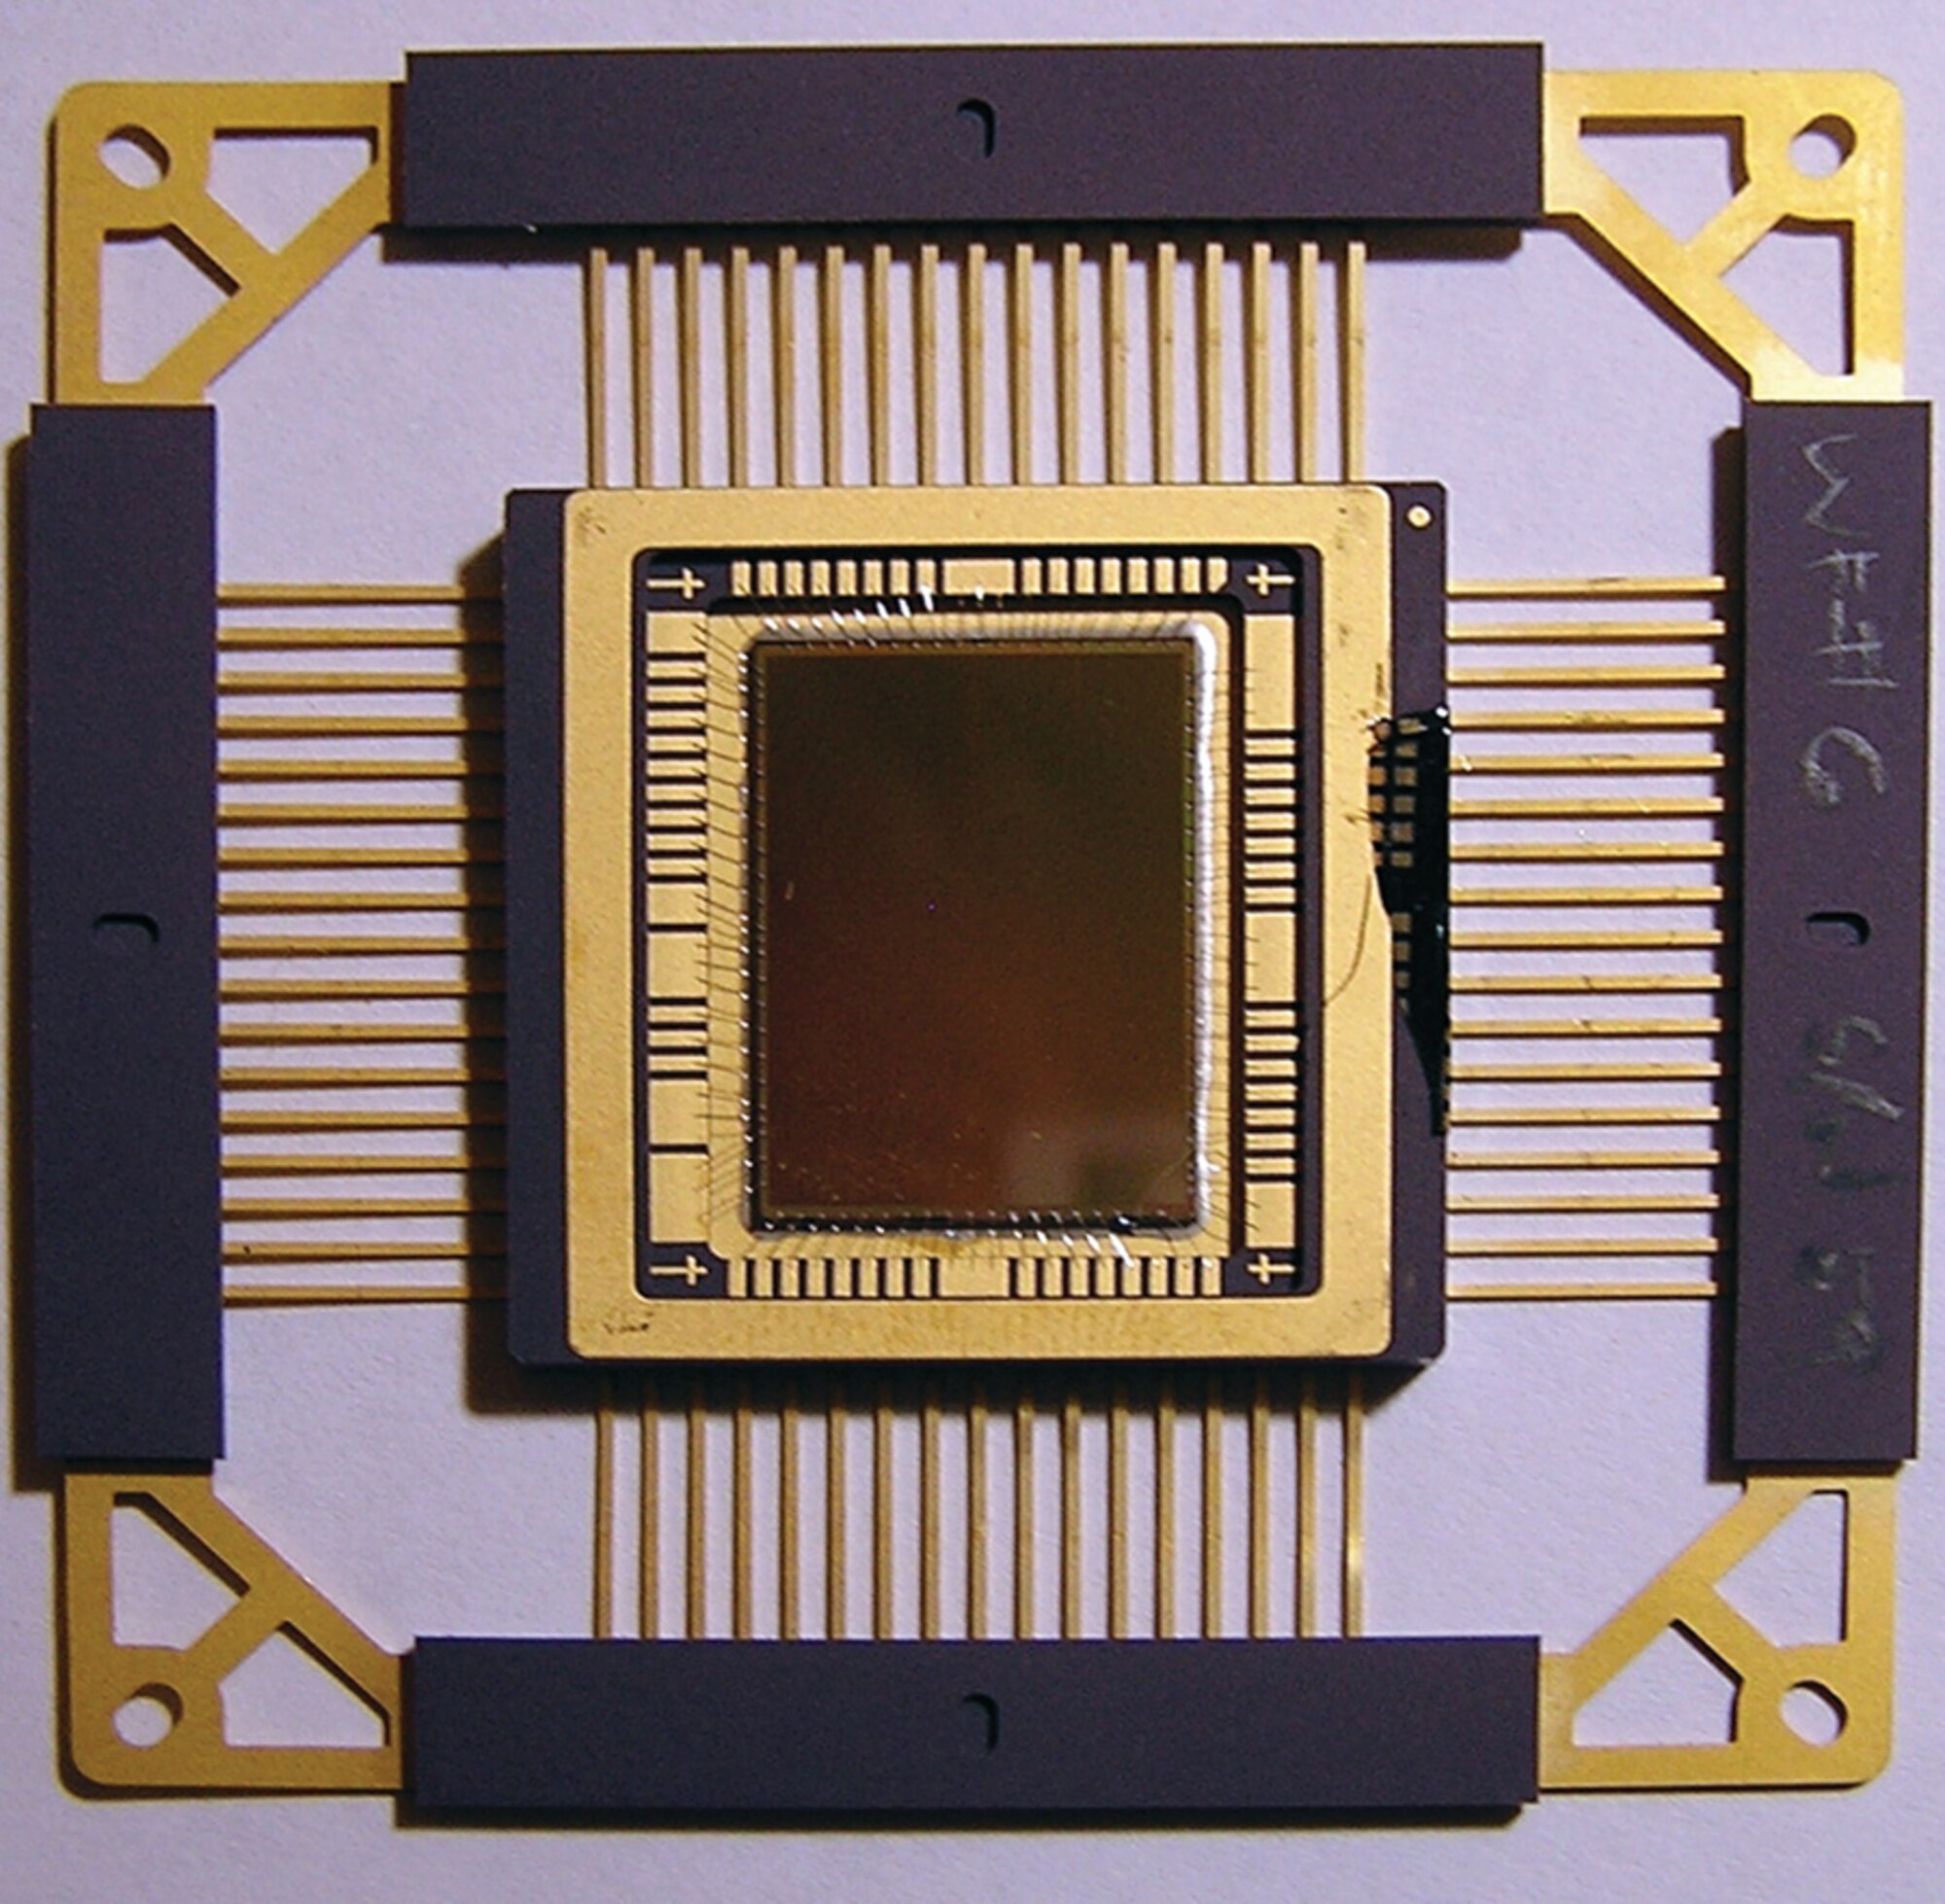 The Air Force Research Laboratory’s investment in radiation-hardened components pans out with Texas Instruments’ newest release – a commercially available 16 Mb radiation-hardened memory component.